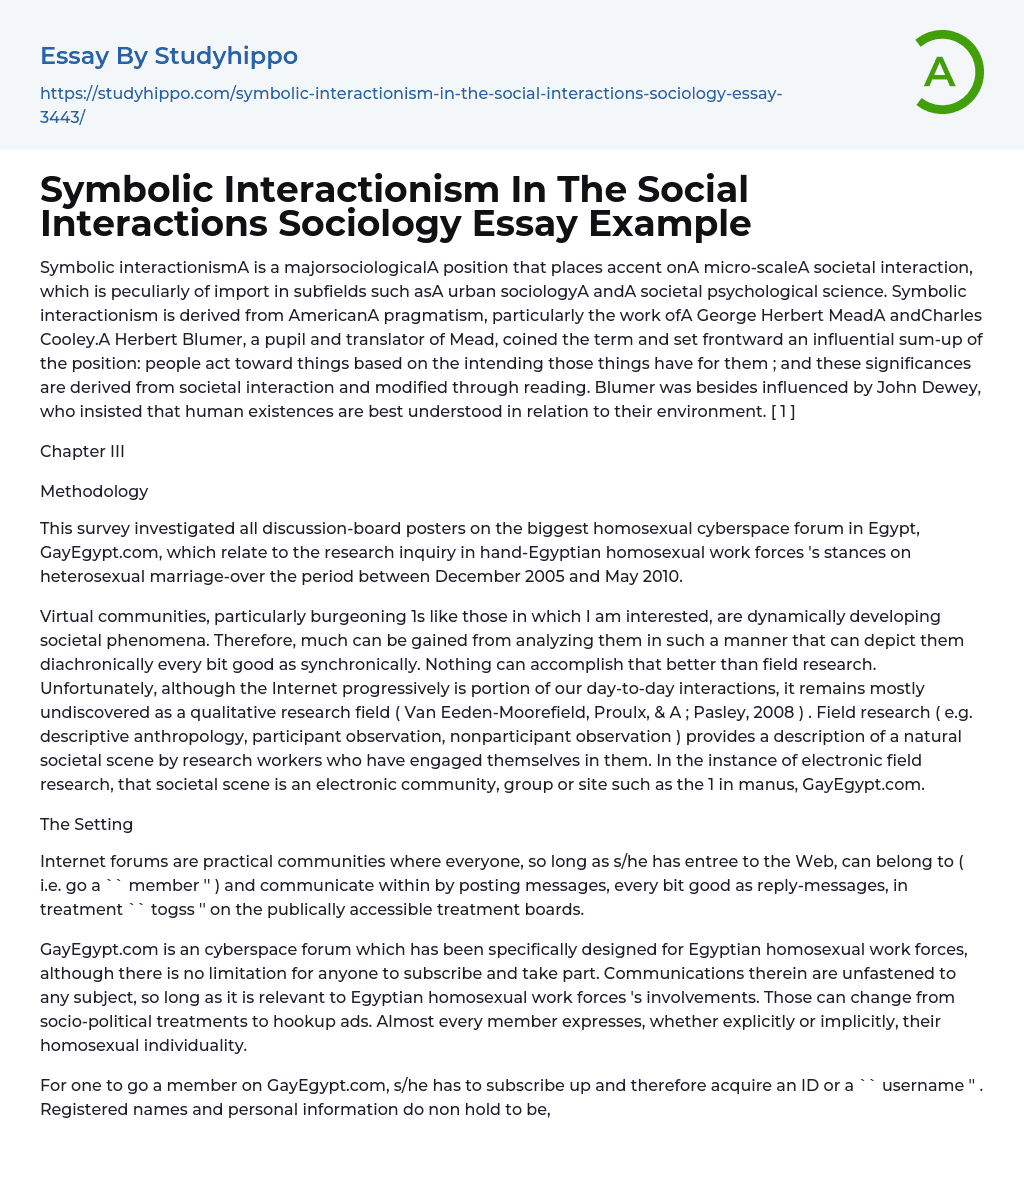 Symbolic Interactionism In The Social Interactions Sociology Essay Example